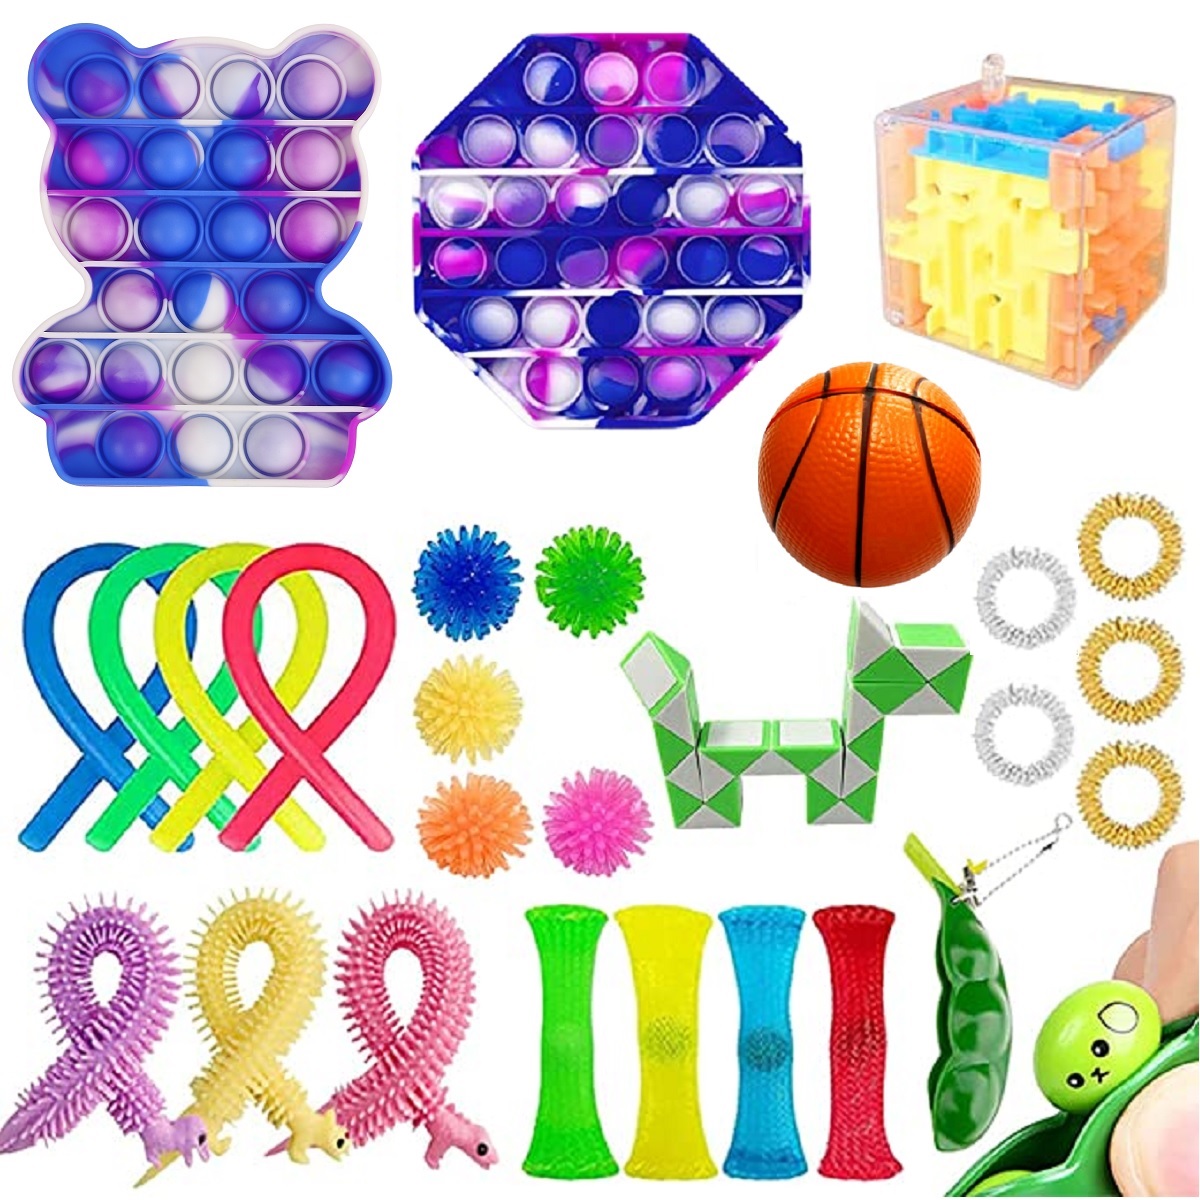 Details about  / 5-20PCS Fidget Sensory Toys Set Stocking Stuffer For Stress Relief Anti-Anxiety